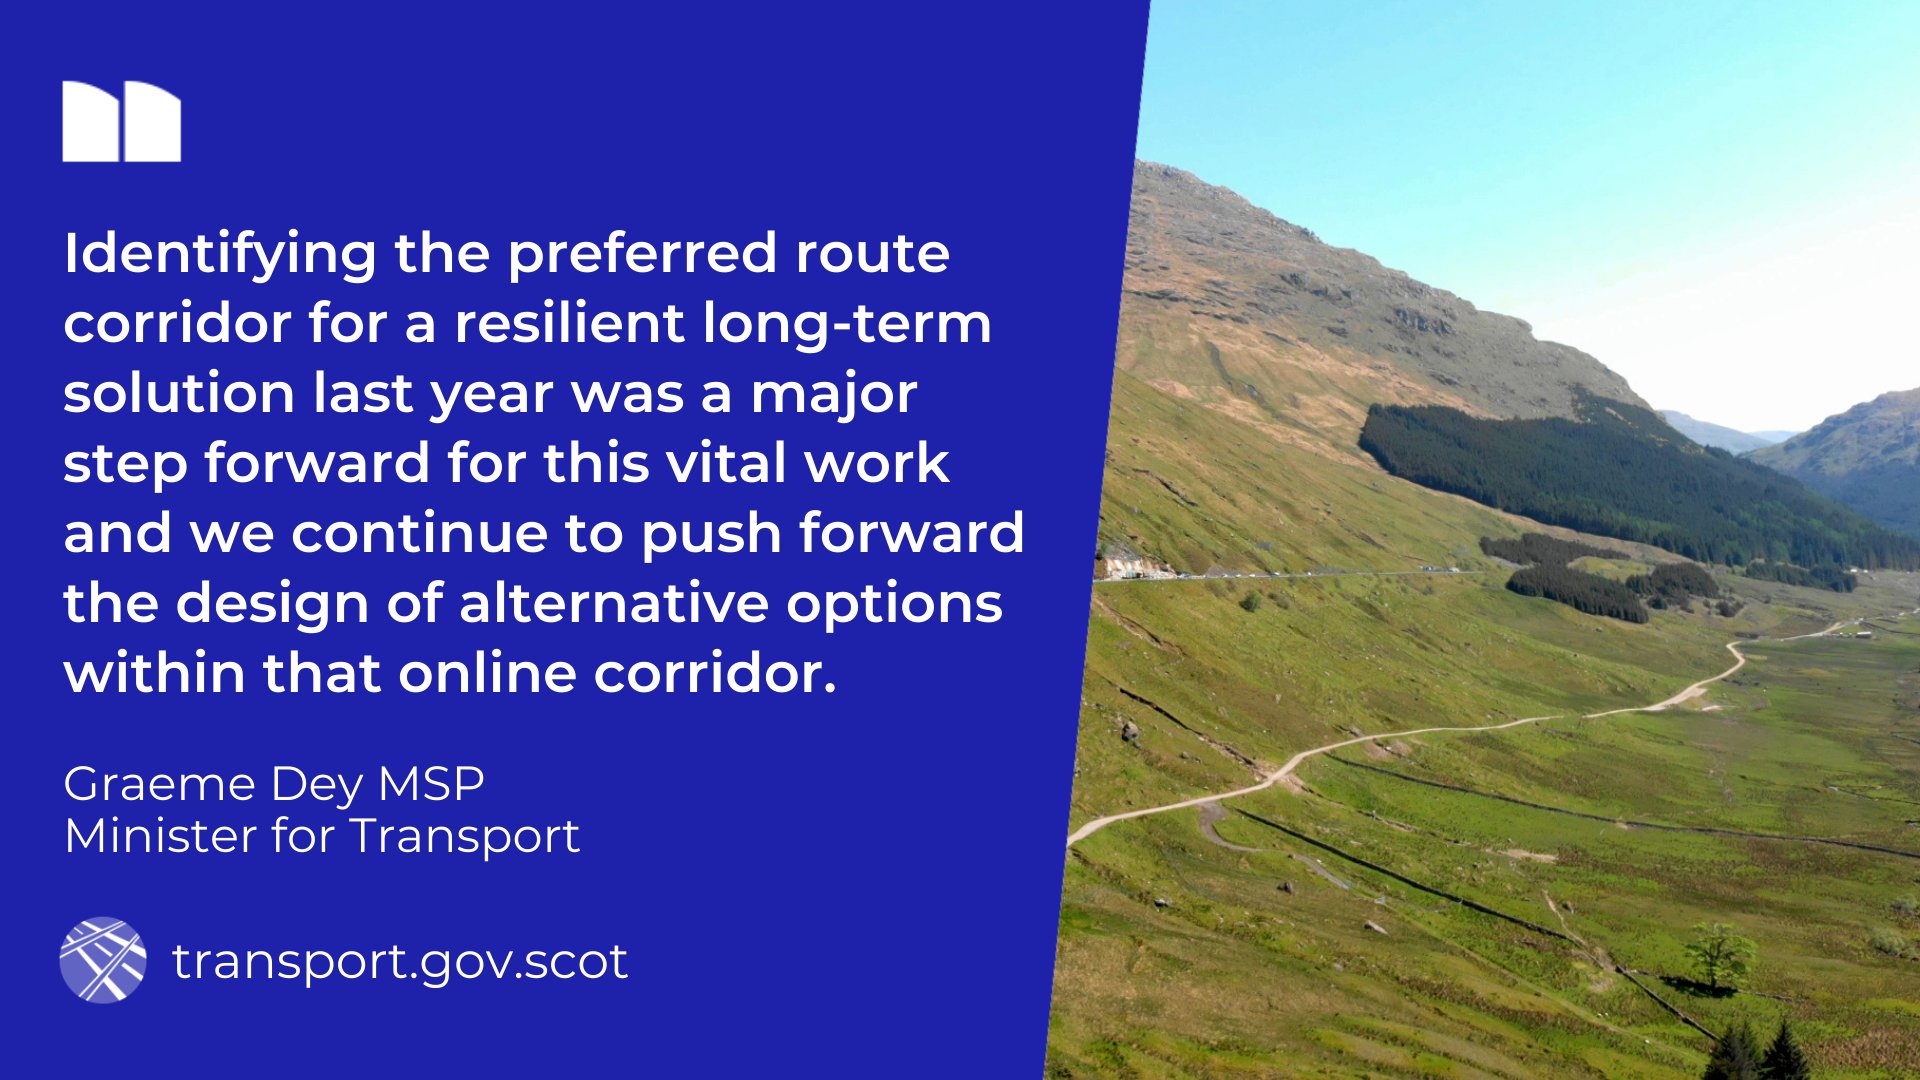 Transport Scotland awards £1.8m contract for A83 ground investigation work